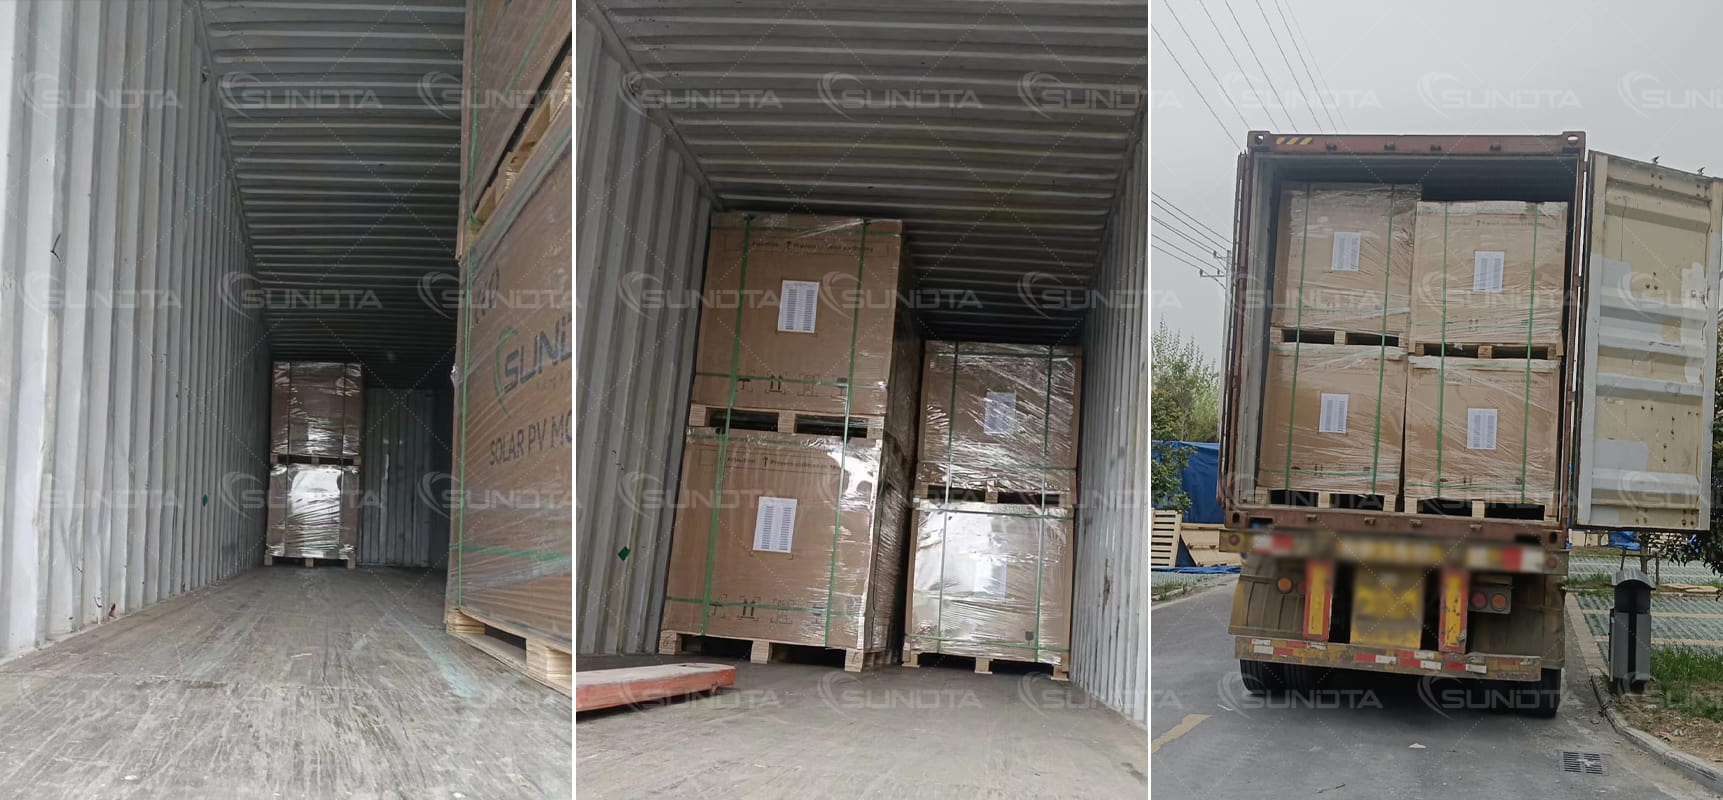 The 550W solar panel was successfully packed and shipped to Cambodia!